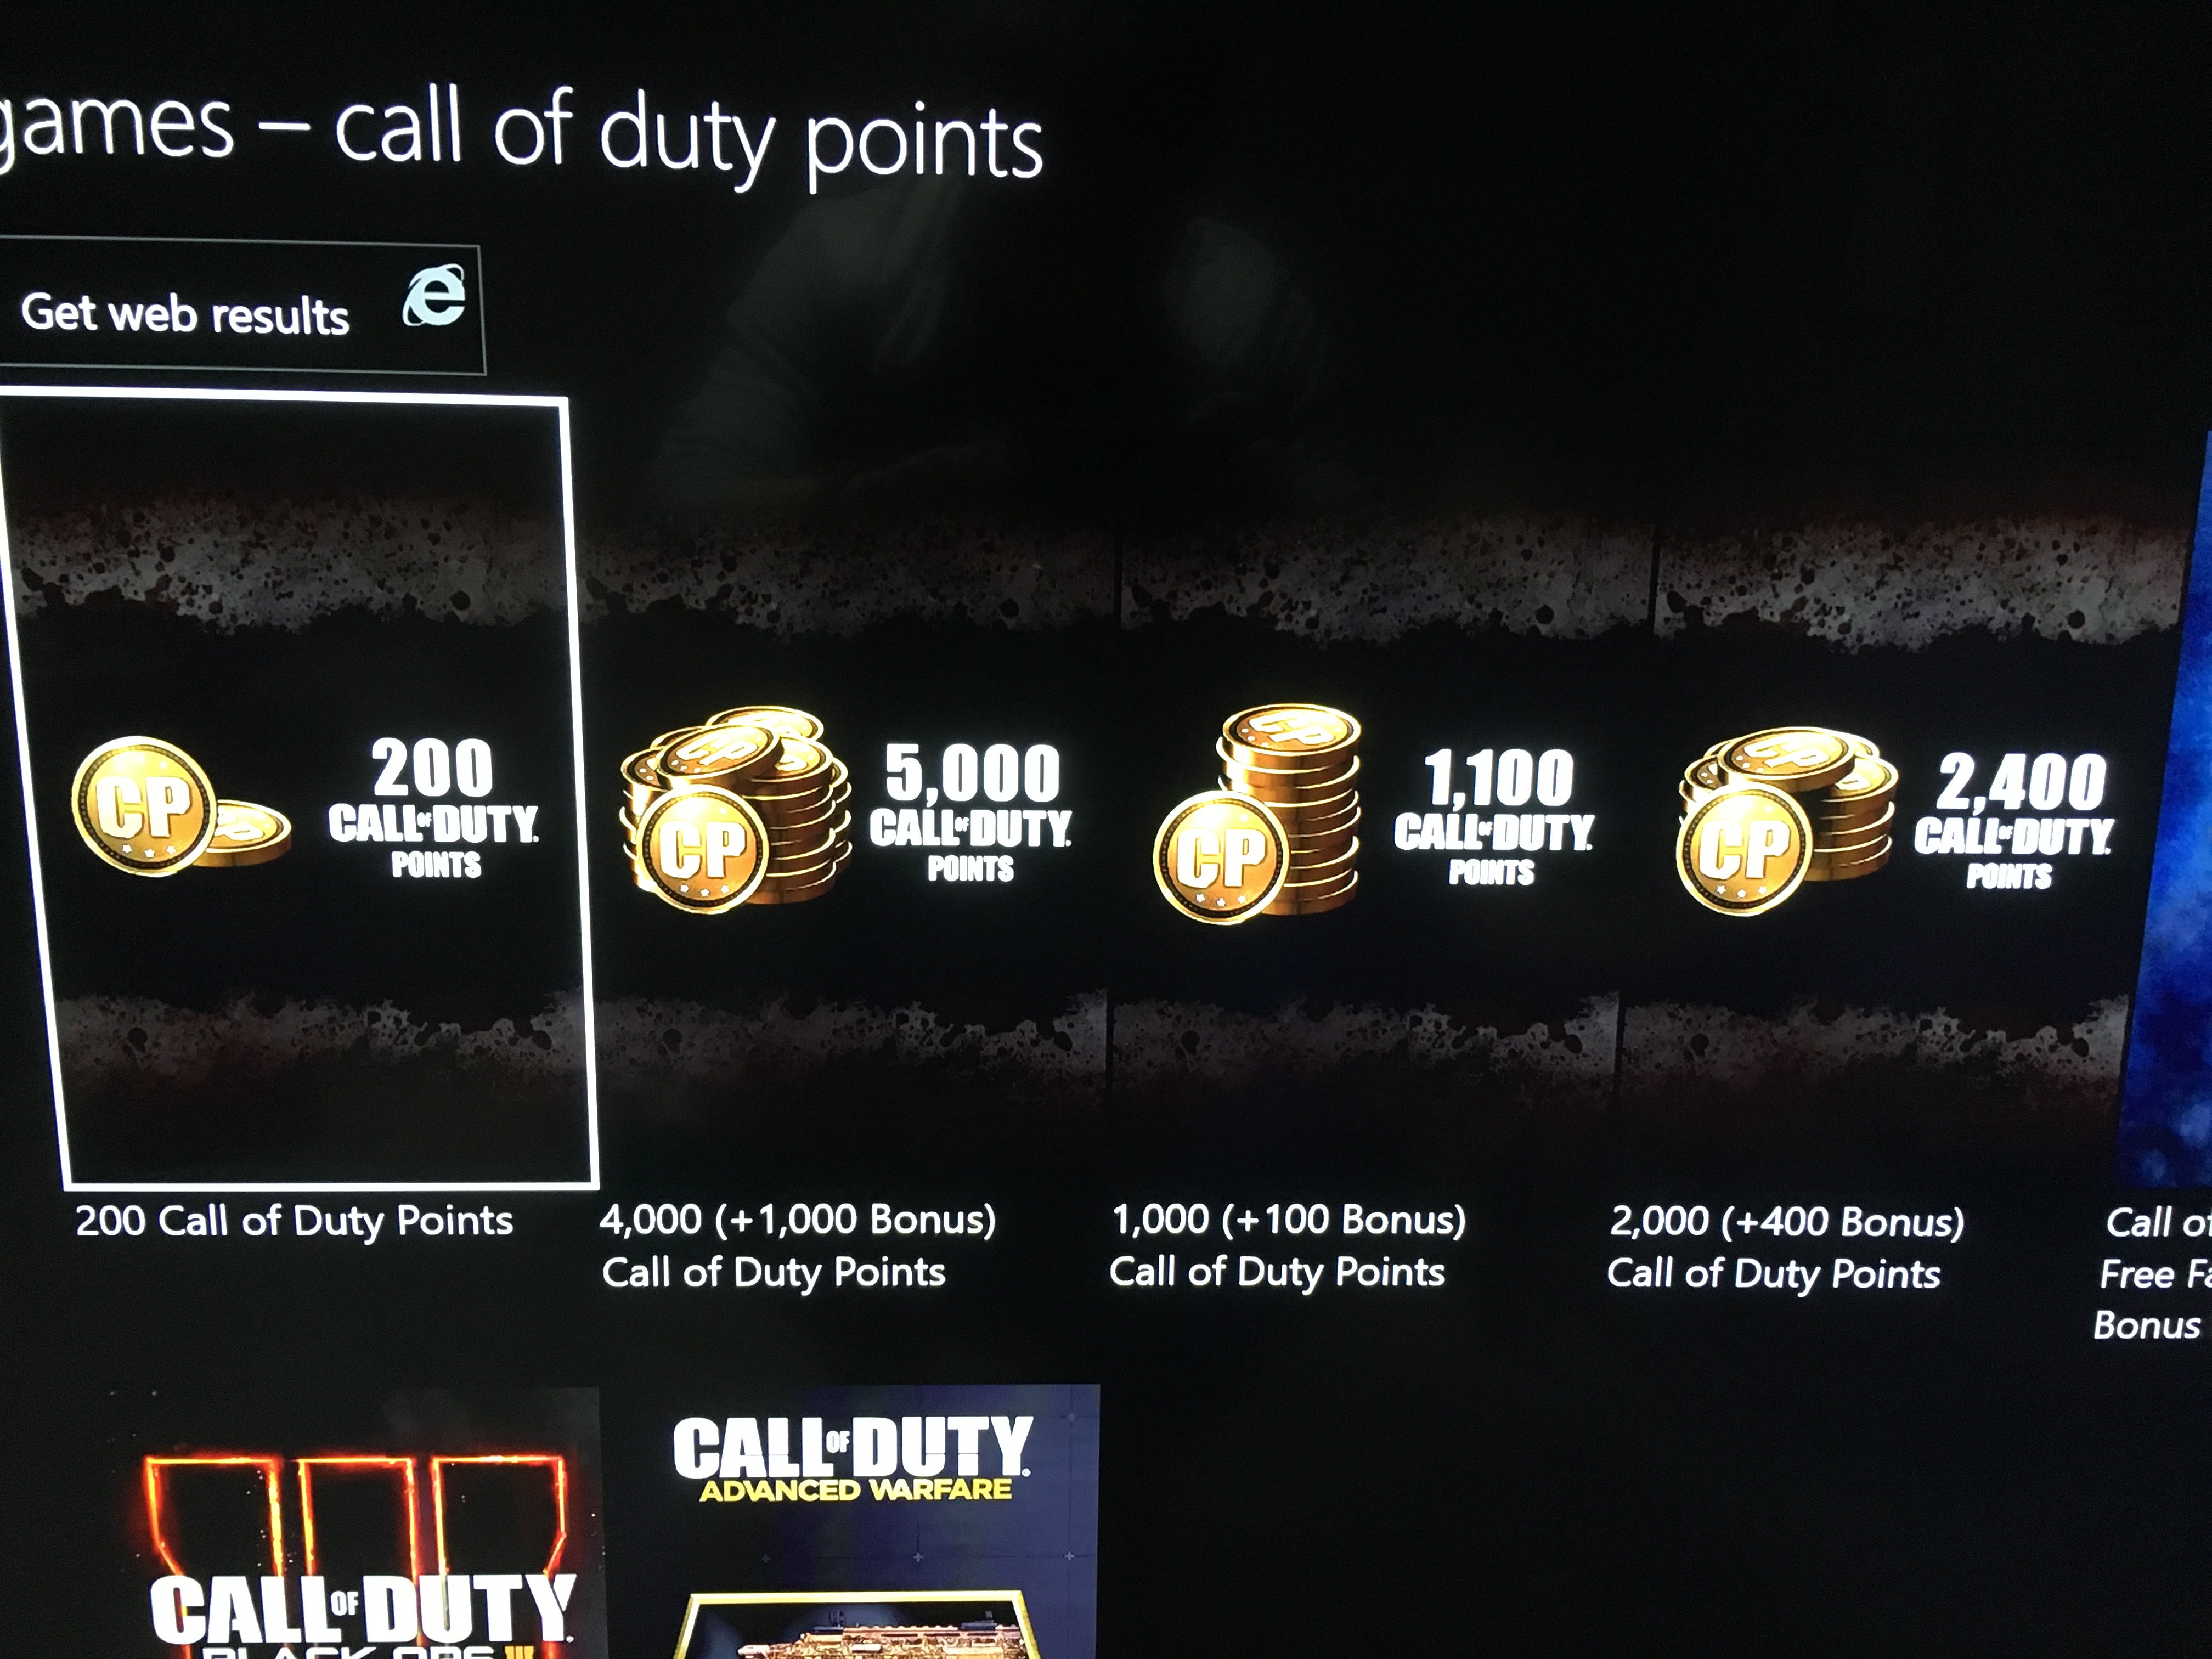 Learn what Call of Duty Points are.